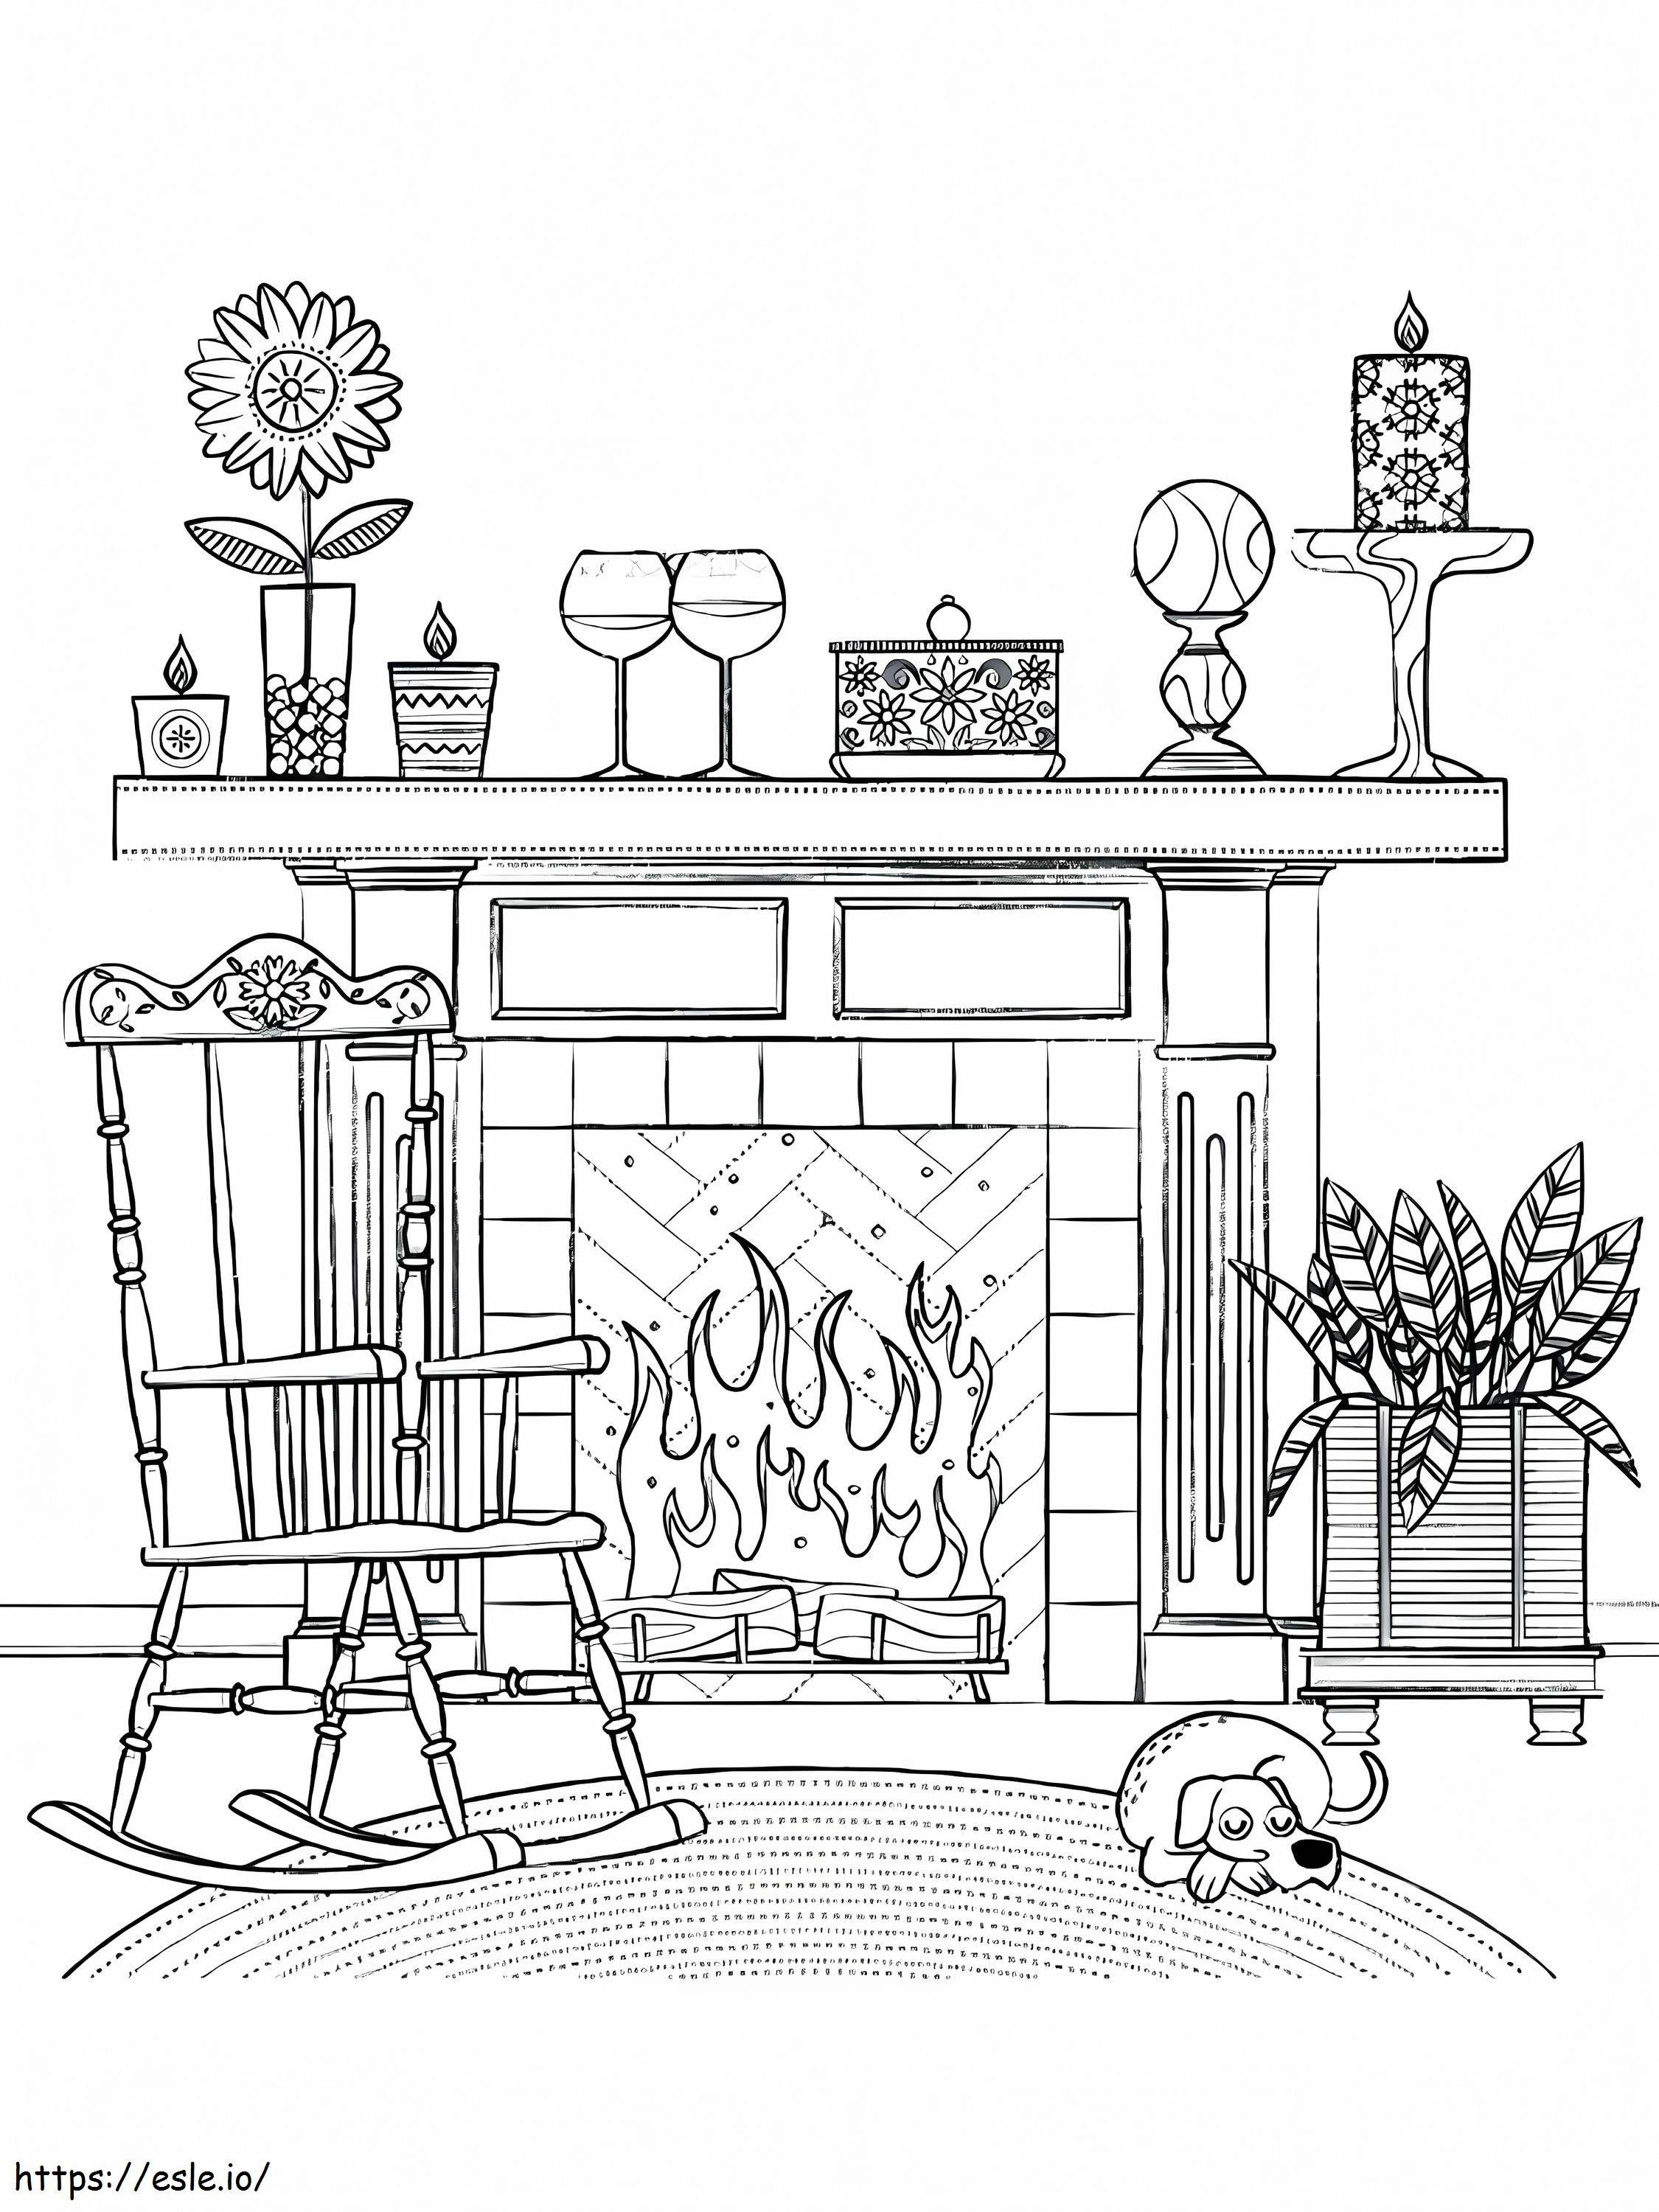 Fireplace And Dog coloring page